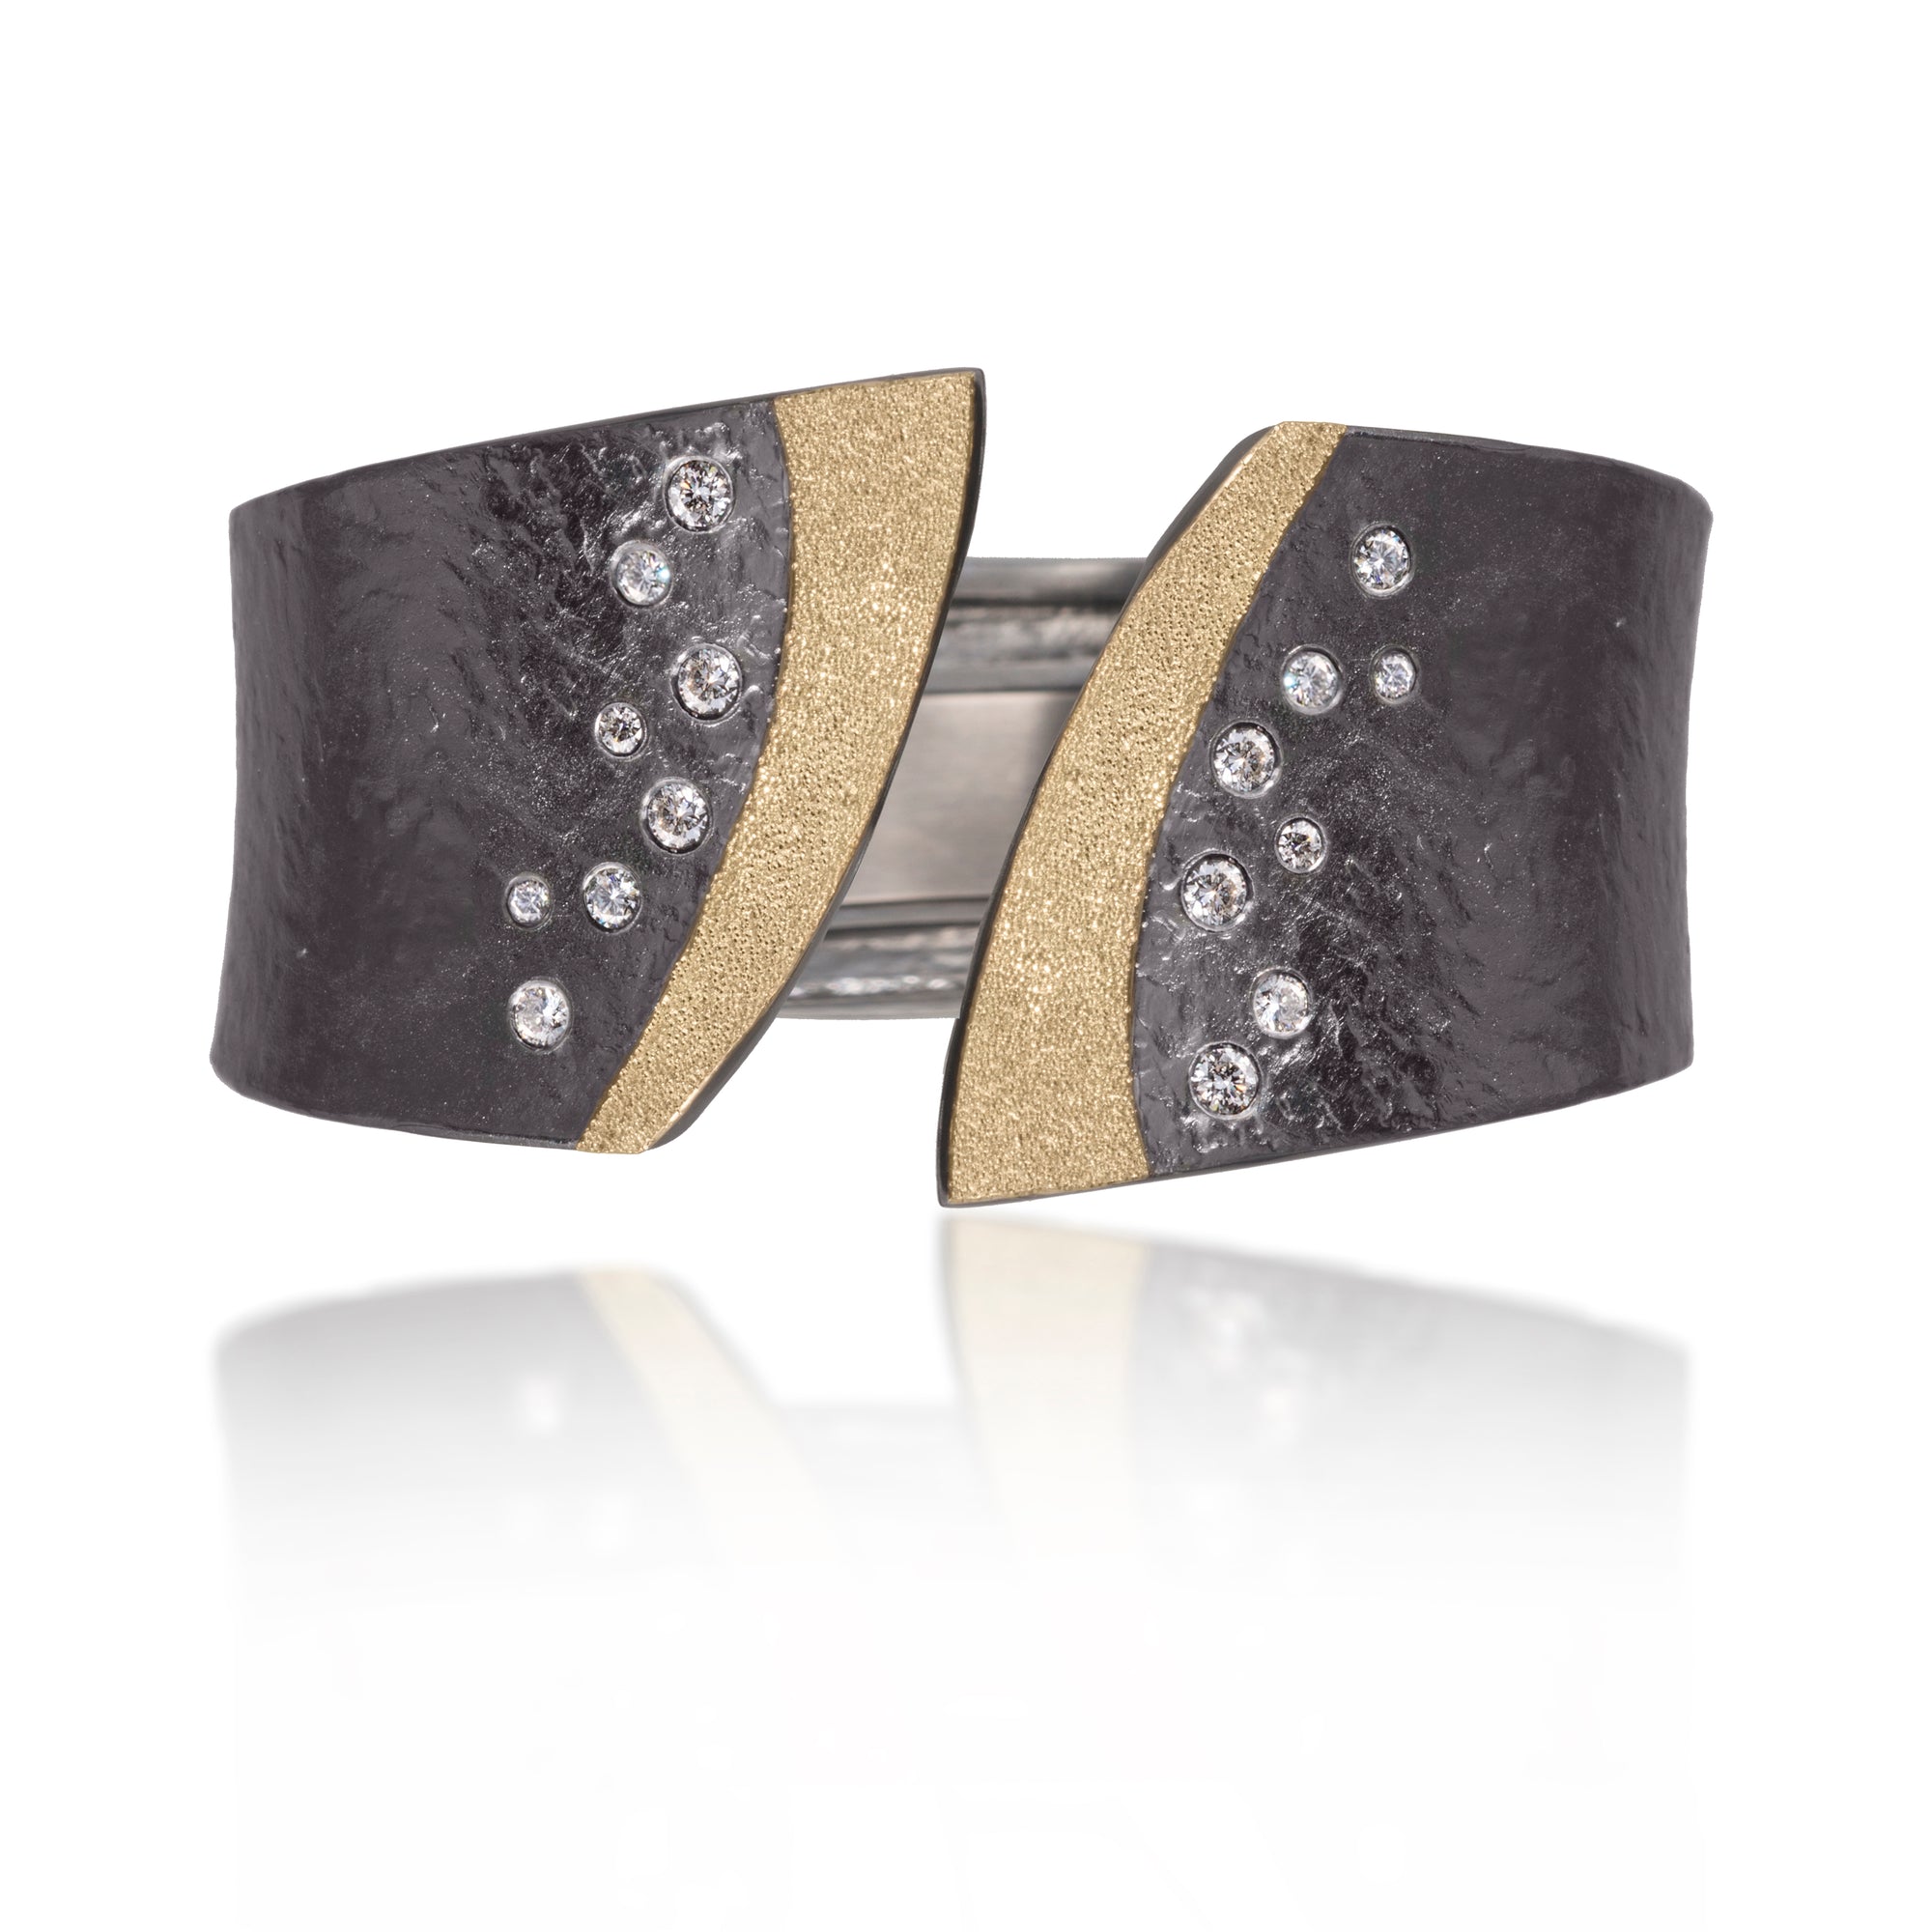 This striking Cyclone Cuff in 18k gold and oxidized sterling silver is flush set with assorted diamonds. A hinge on the back side of this tapered cuff allows it to fully open, making it incredibly easy to put on and off with one hand. Symmetric bypass style, hand fabricated, with a spring steel hinge and hammered textured. Available with white or gray diamonds. As shown, 0.59 tcw.